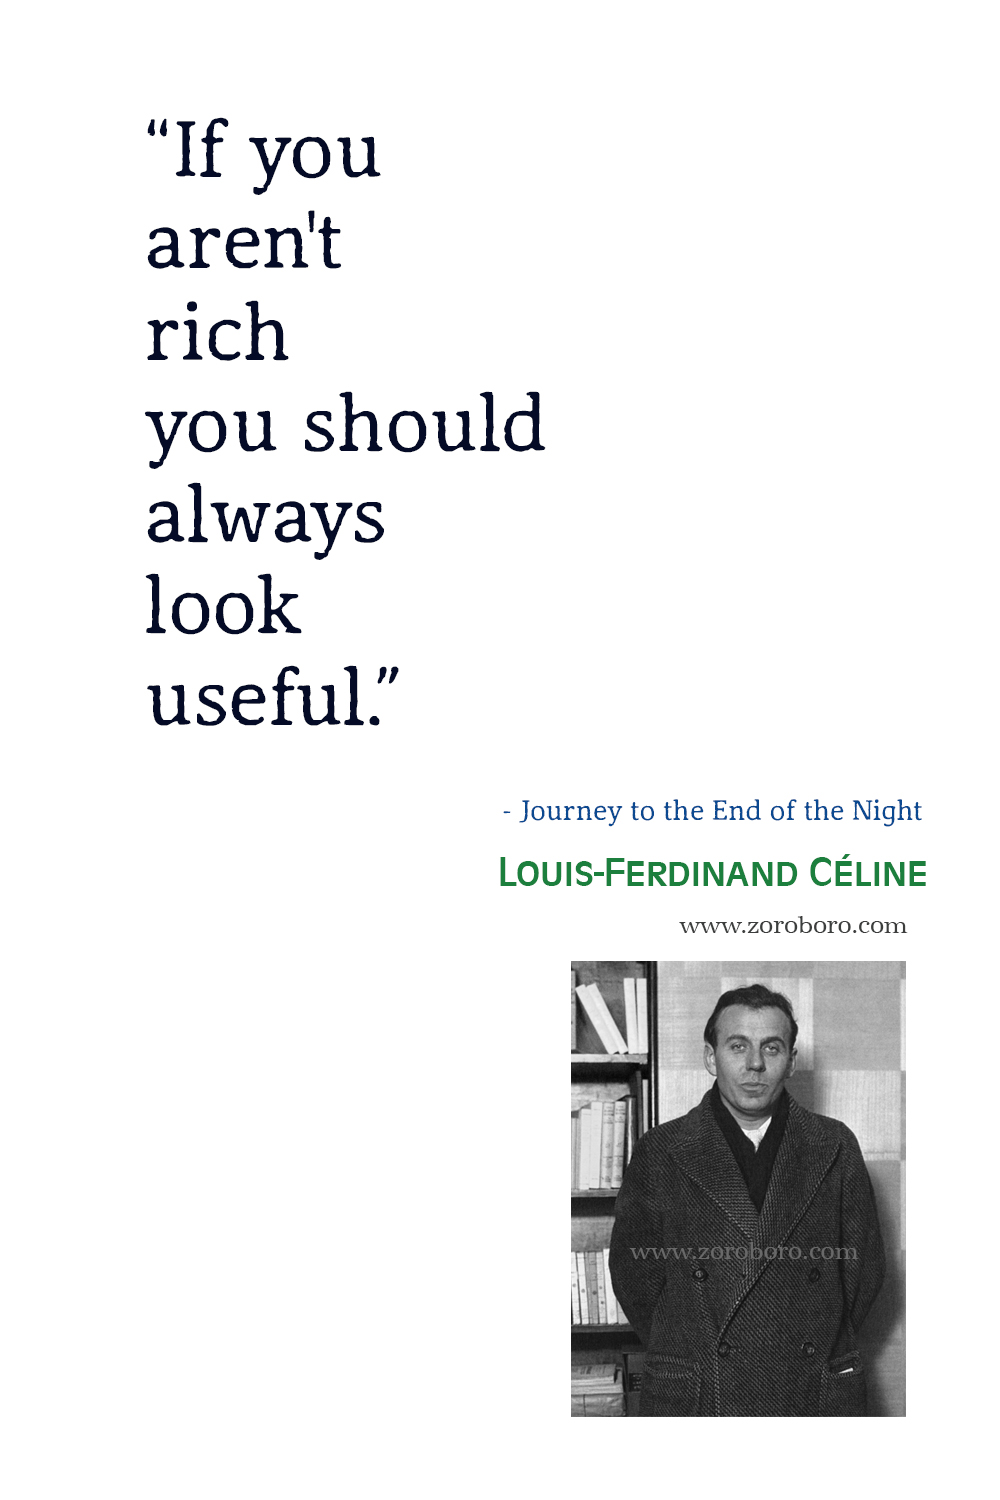 Louis-Ferdinand Celine Quotes, Louis-Ferdinand Celine Journey to the End of the Night Quotes, Louis-Ferdinand Céline Poems, Louis-Ferdinand Celine Poetry.